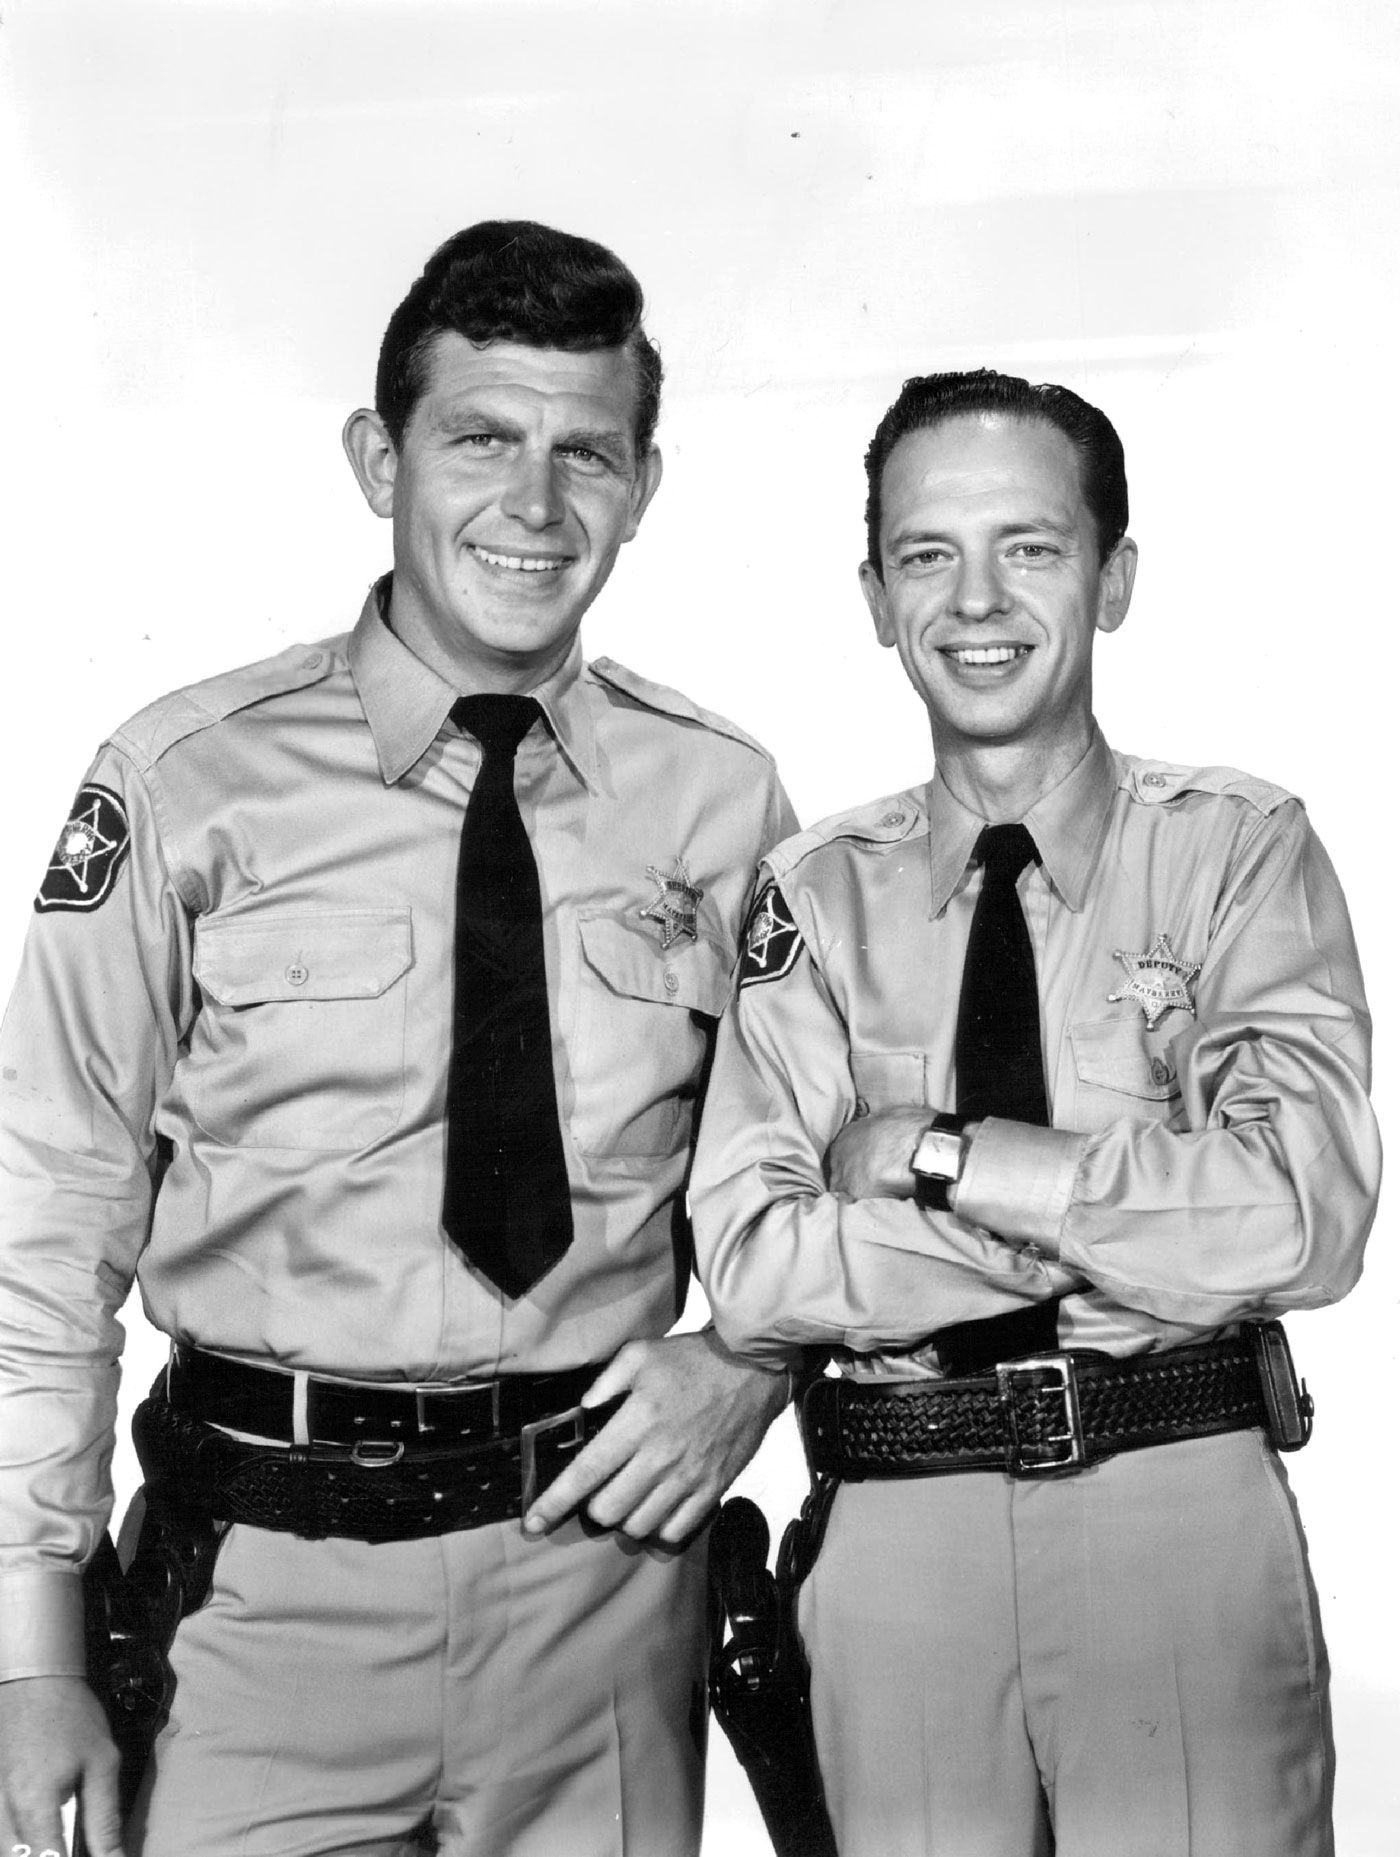 Andy griffith is an asshole